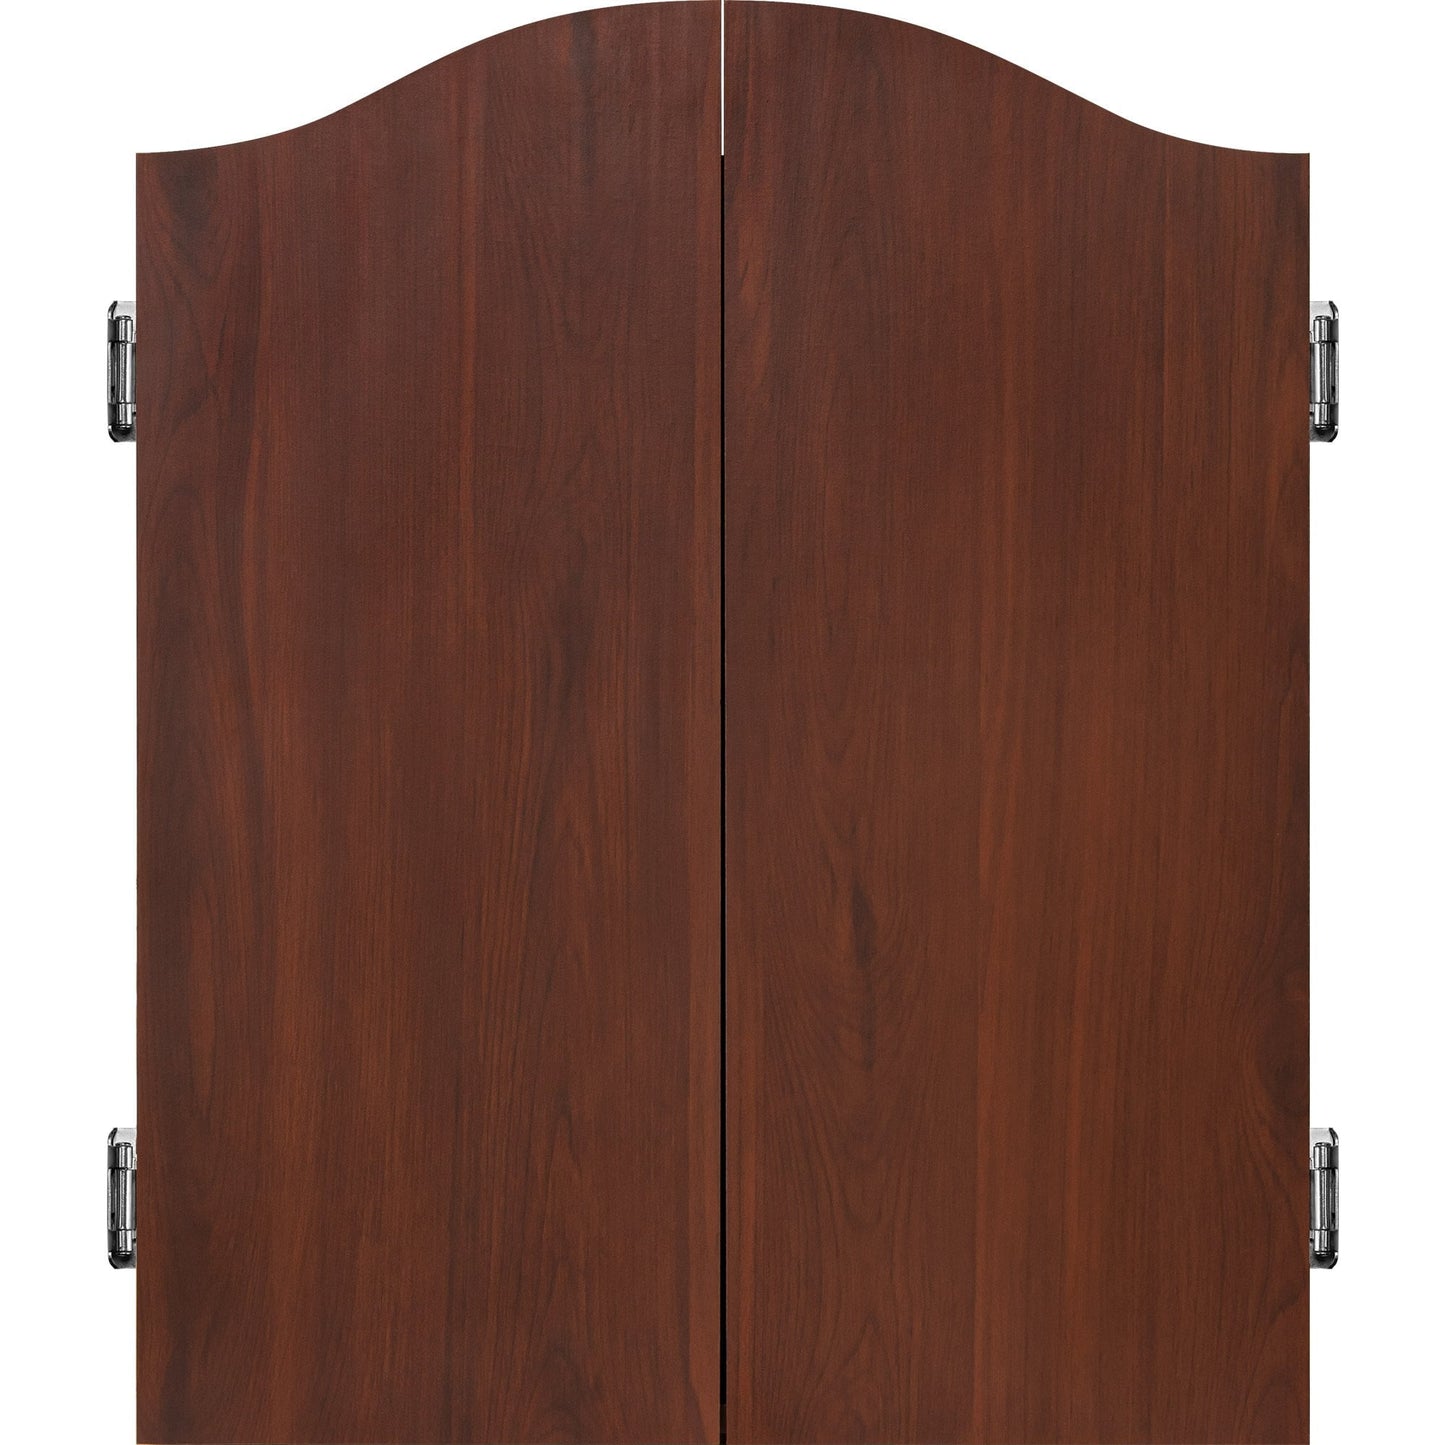 Mission Dartboard Cabinet - Deluxe Quality - Plain Sedona Red